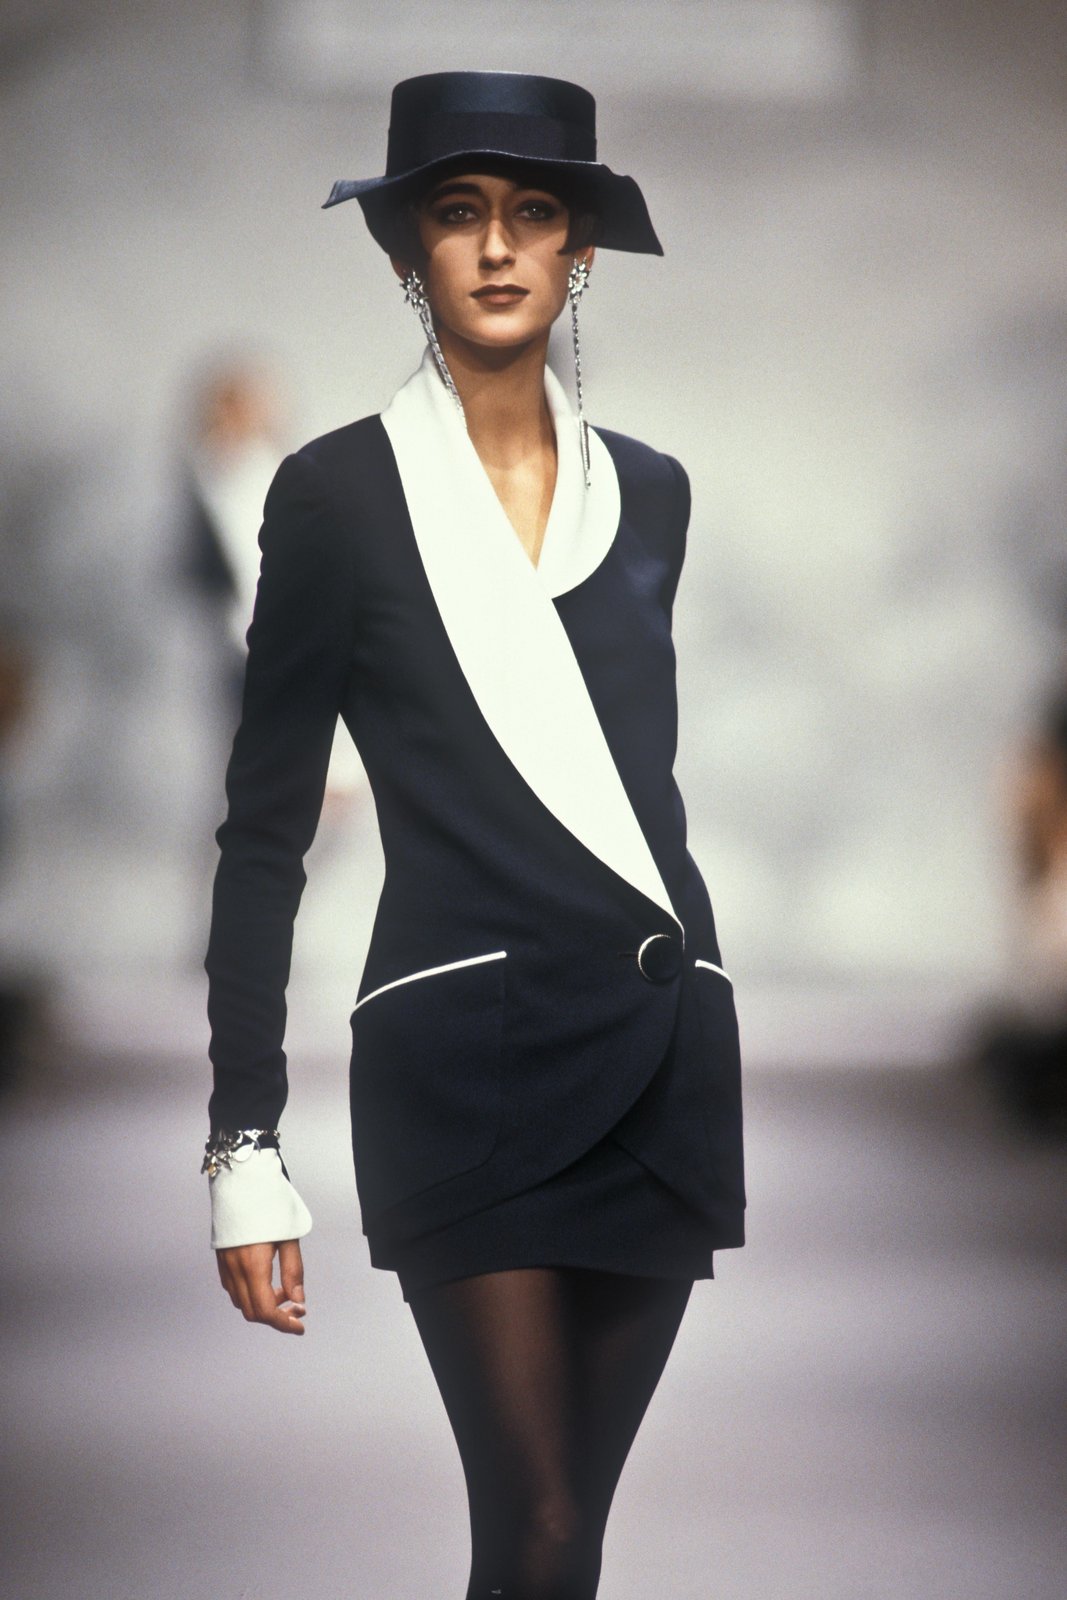 Fashion Classic: Karl LAGERFELD Spring/Summer 1990 | Page 3 | Lipstick ...